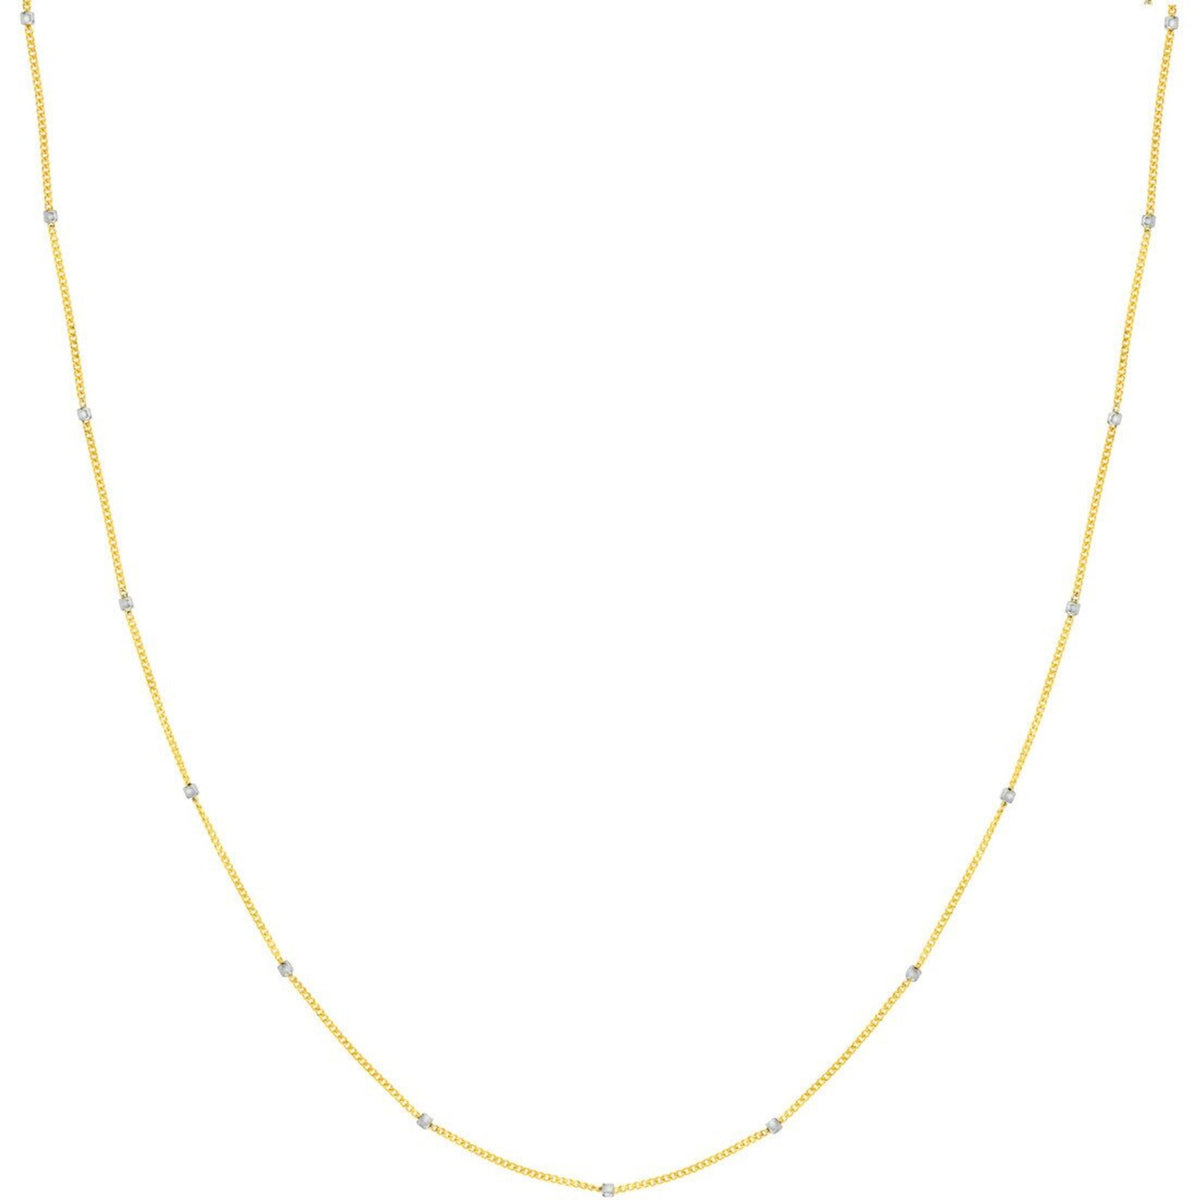 Olas d'Oro 16" Necklace - 14K Yellow/White Gold Two-Tone Cube Saturn Chain with Lobster Lock